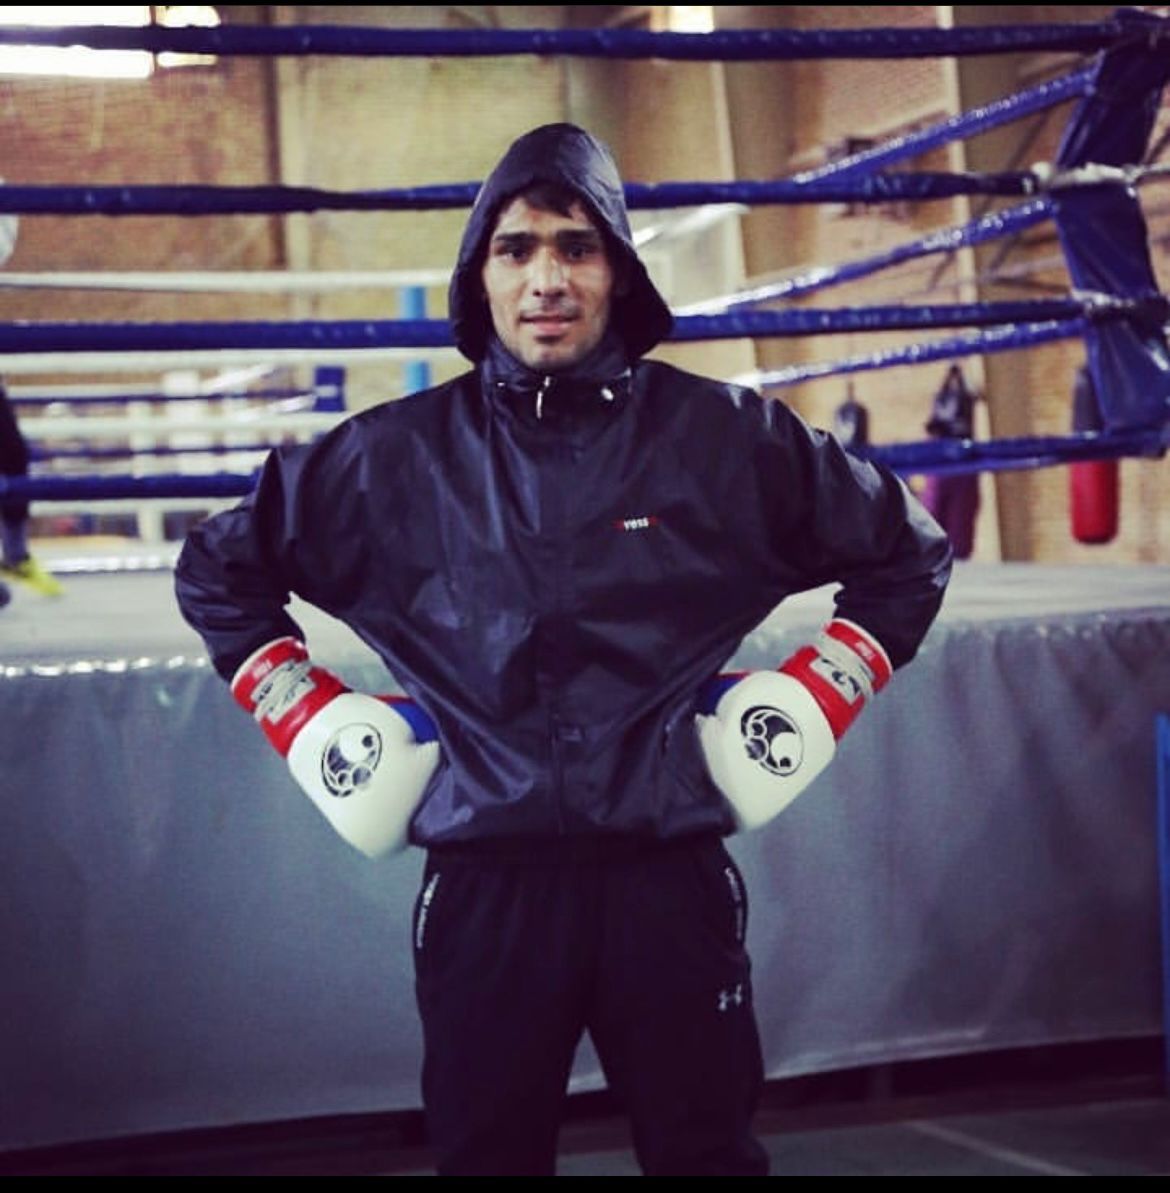 Danial Shahbakhsh’s innate skills as a boxer helped him become a rising name in the world